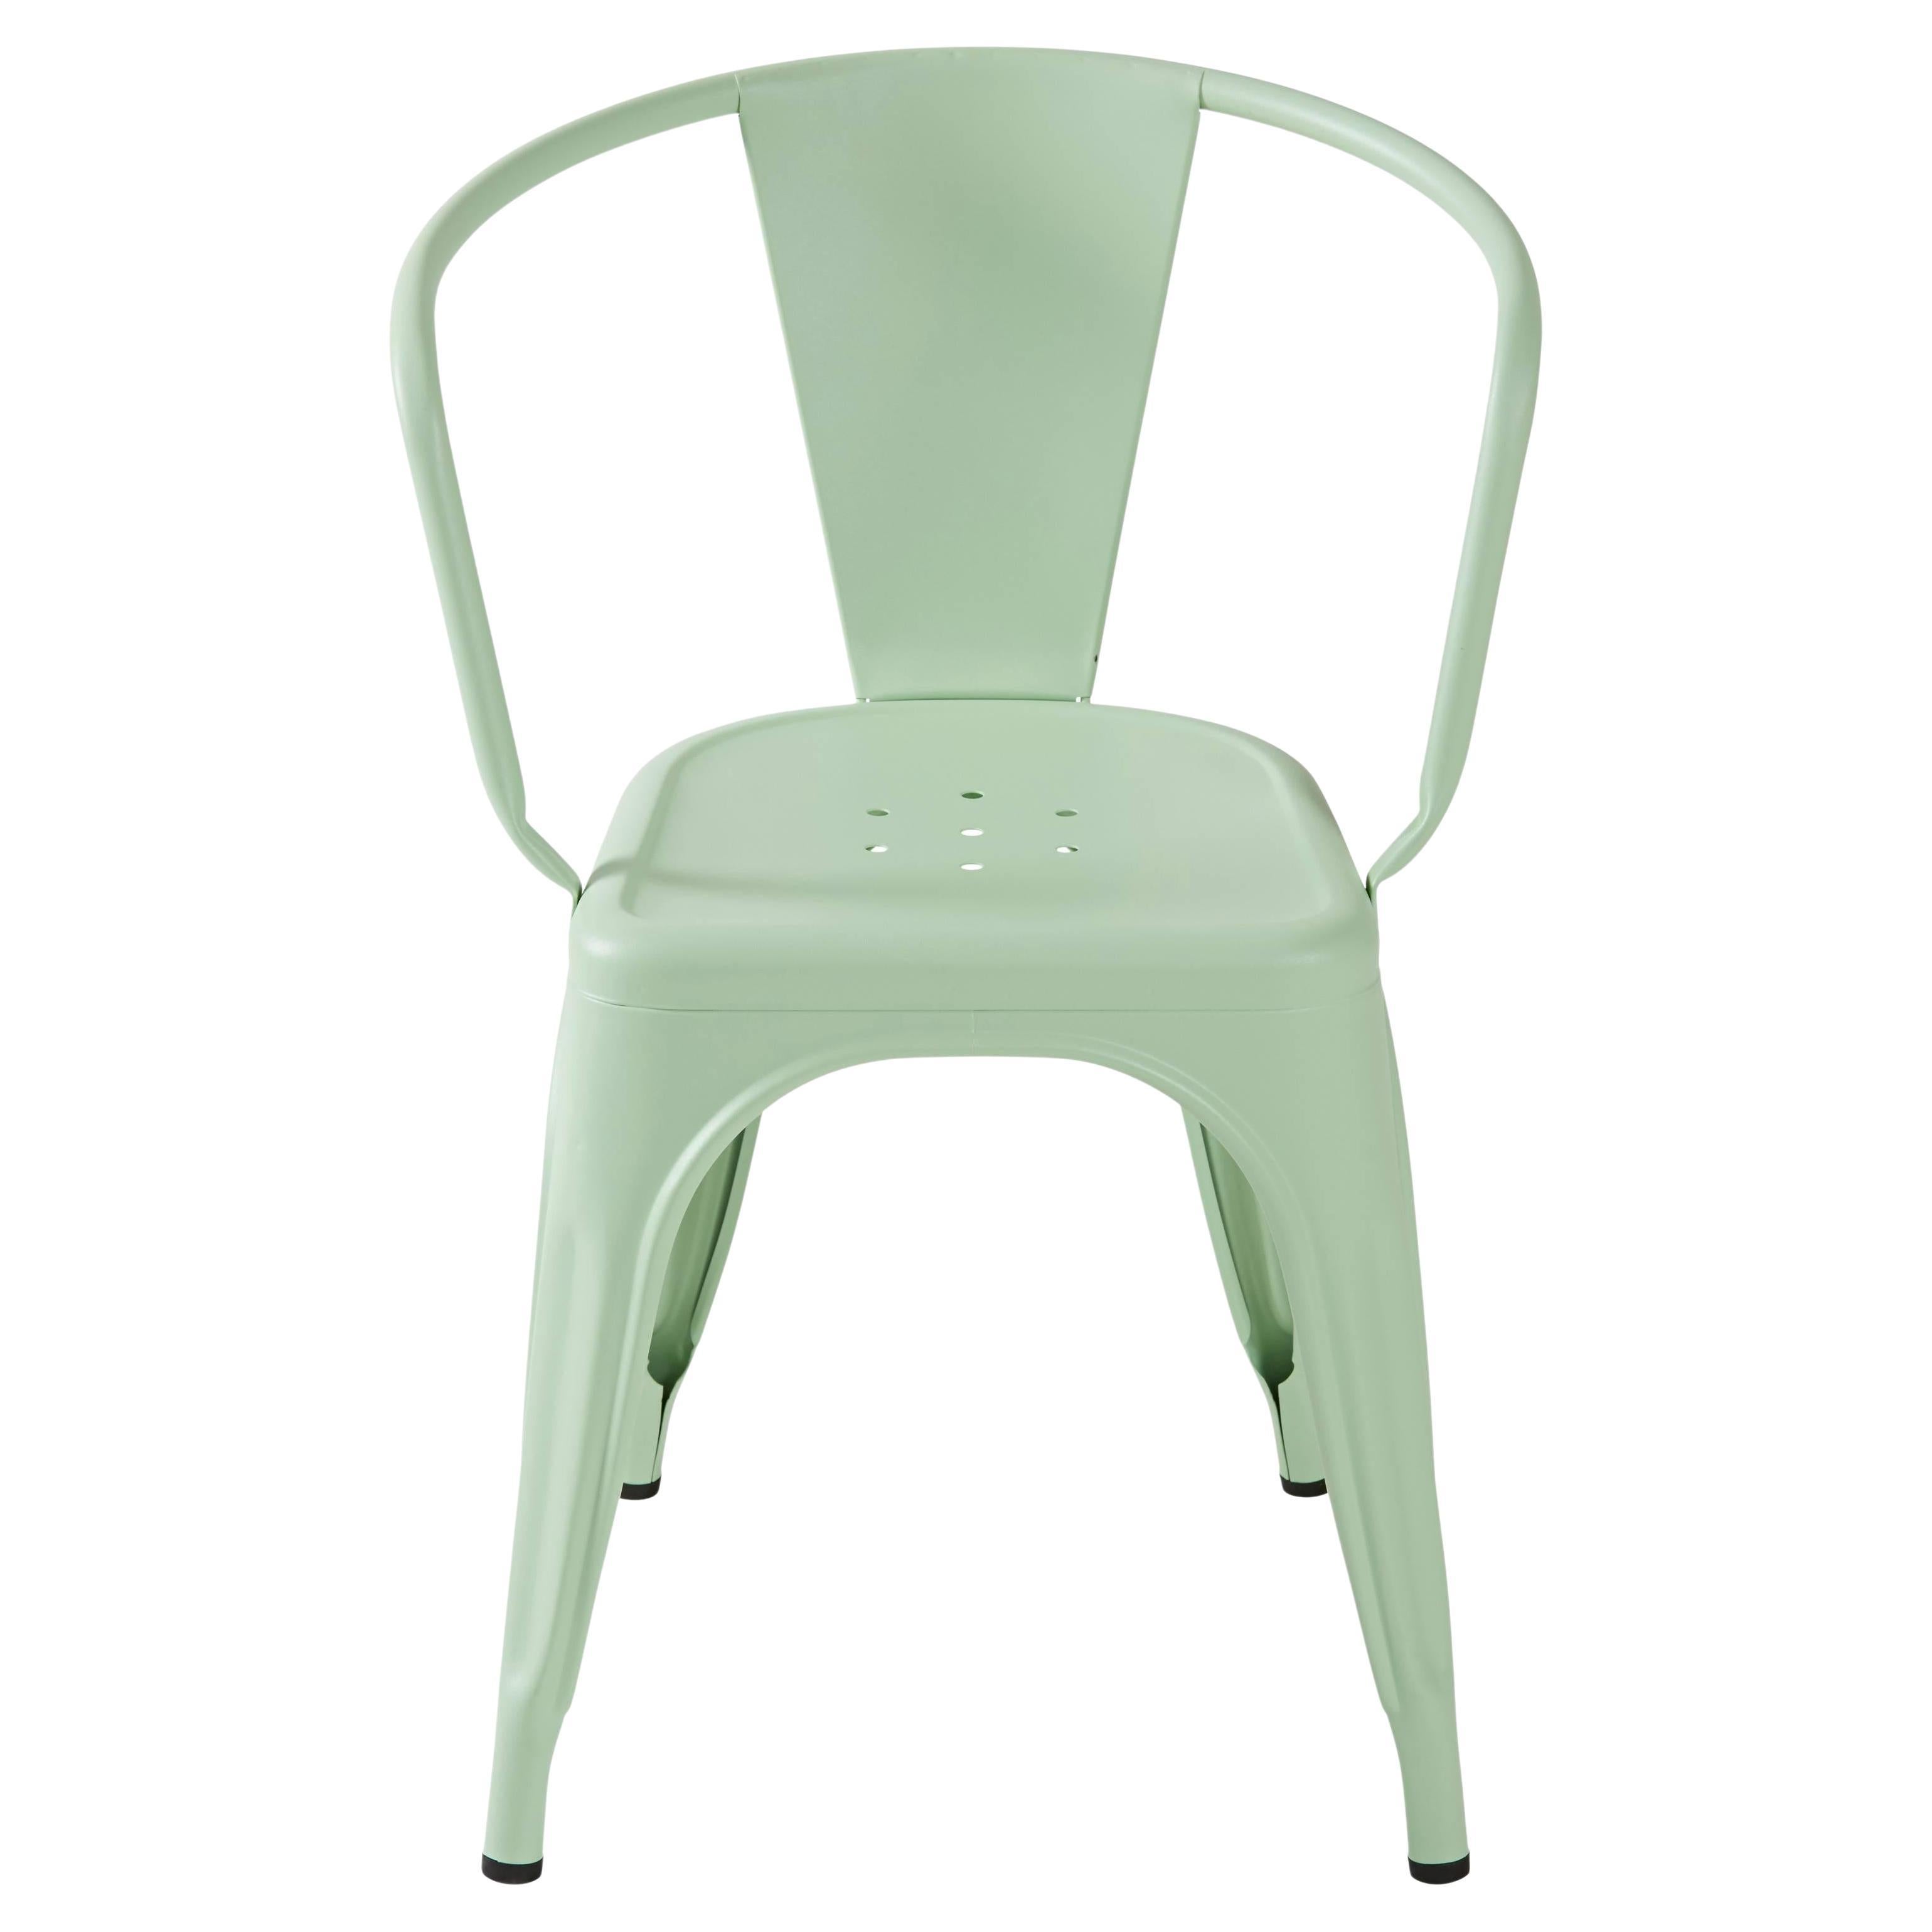 A56 Armchair in Anise Green by Jean Pauchard & Tolix